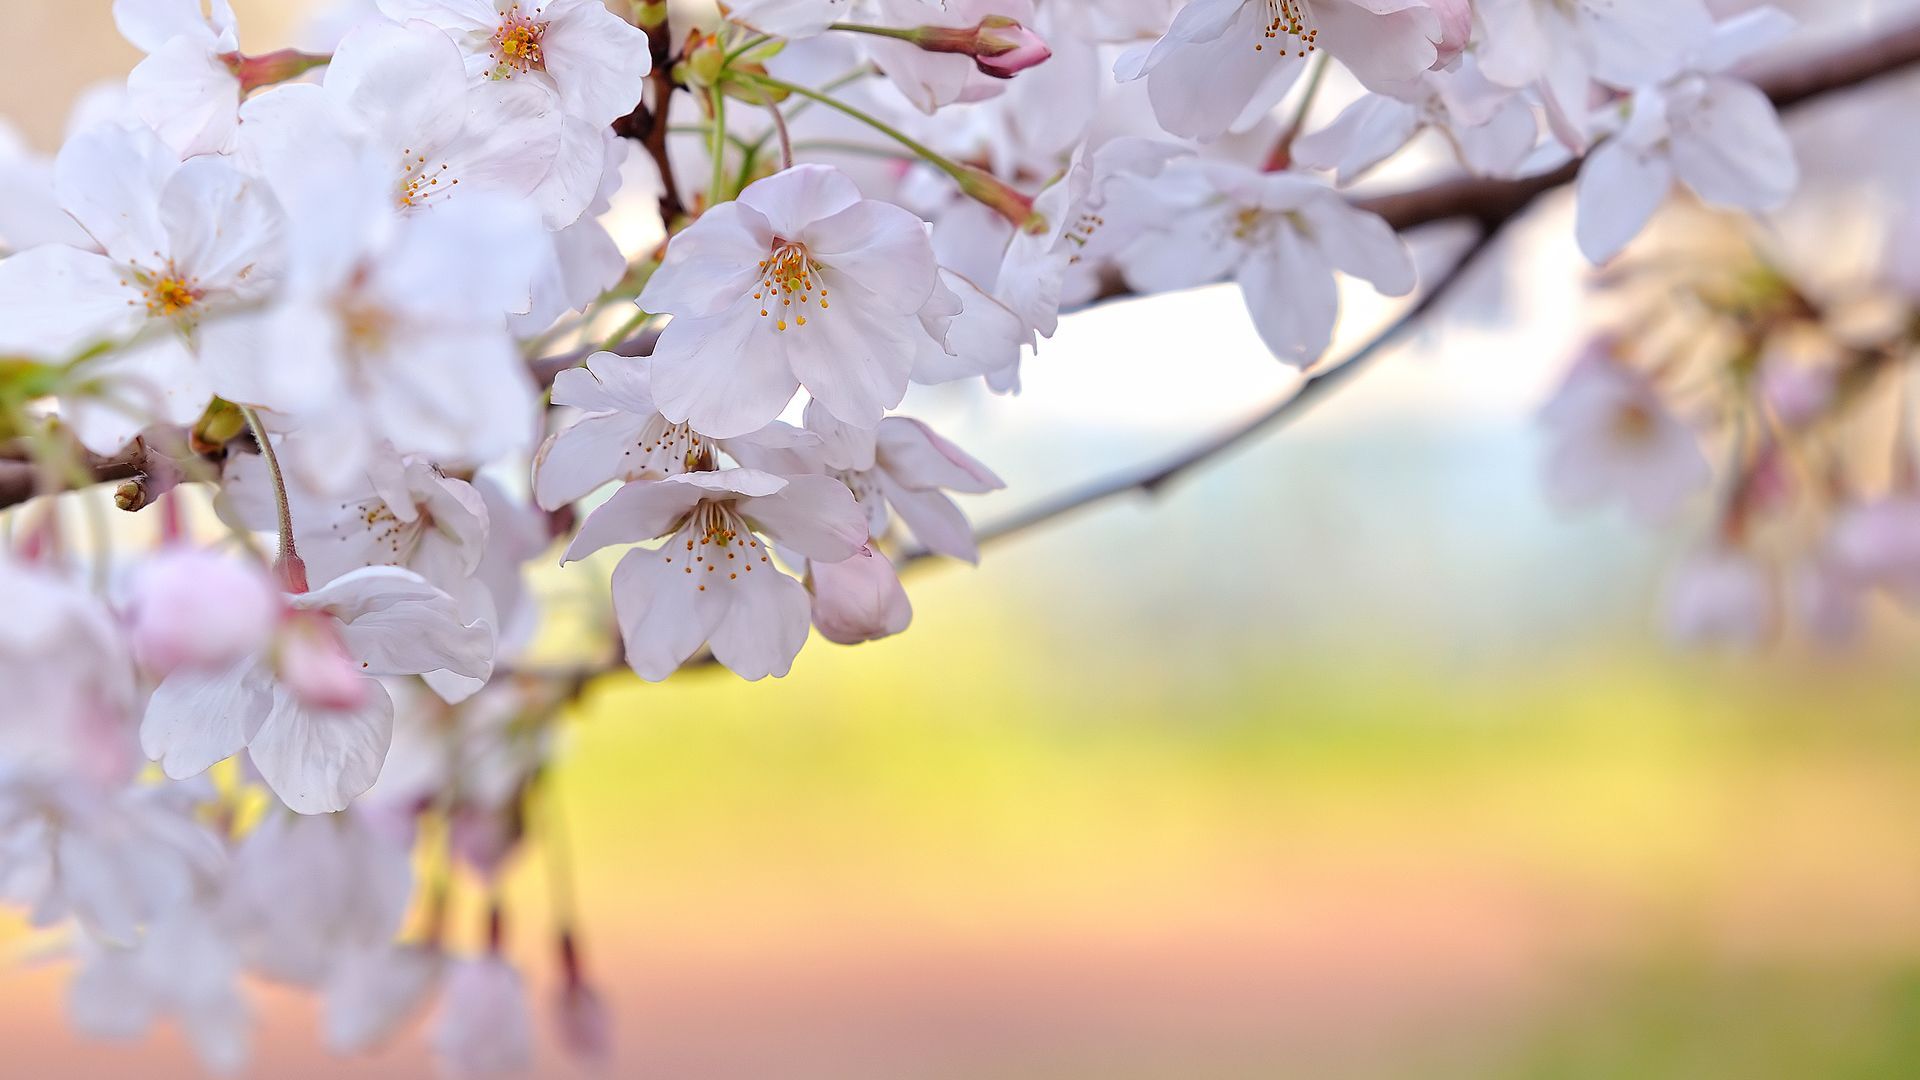 awesome White Cherry Blossoms In High Quality. Spring flowers